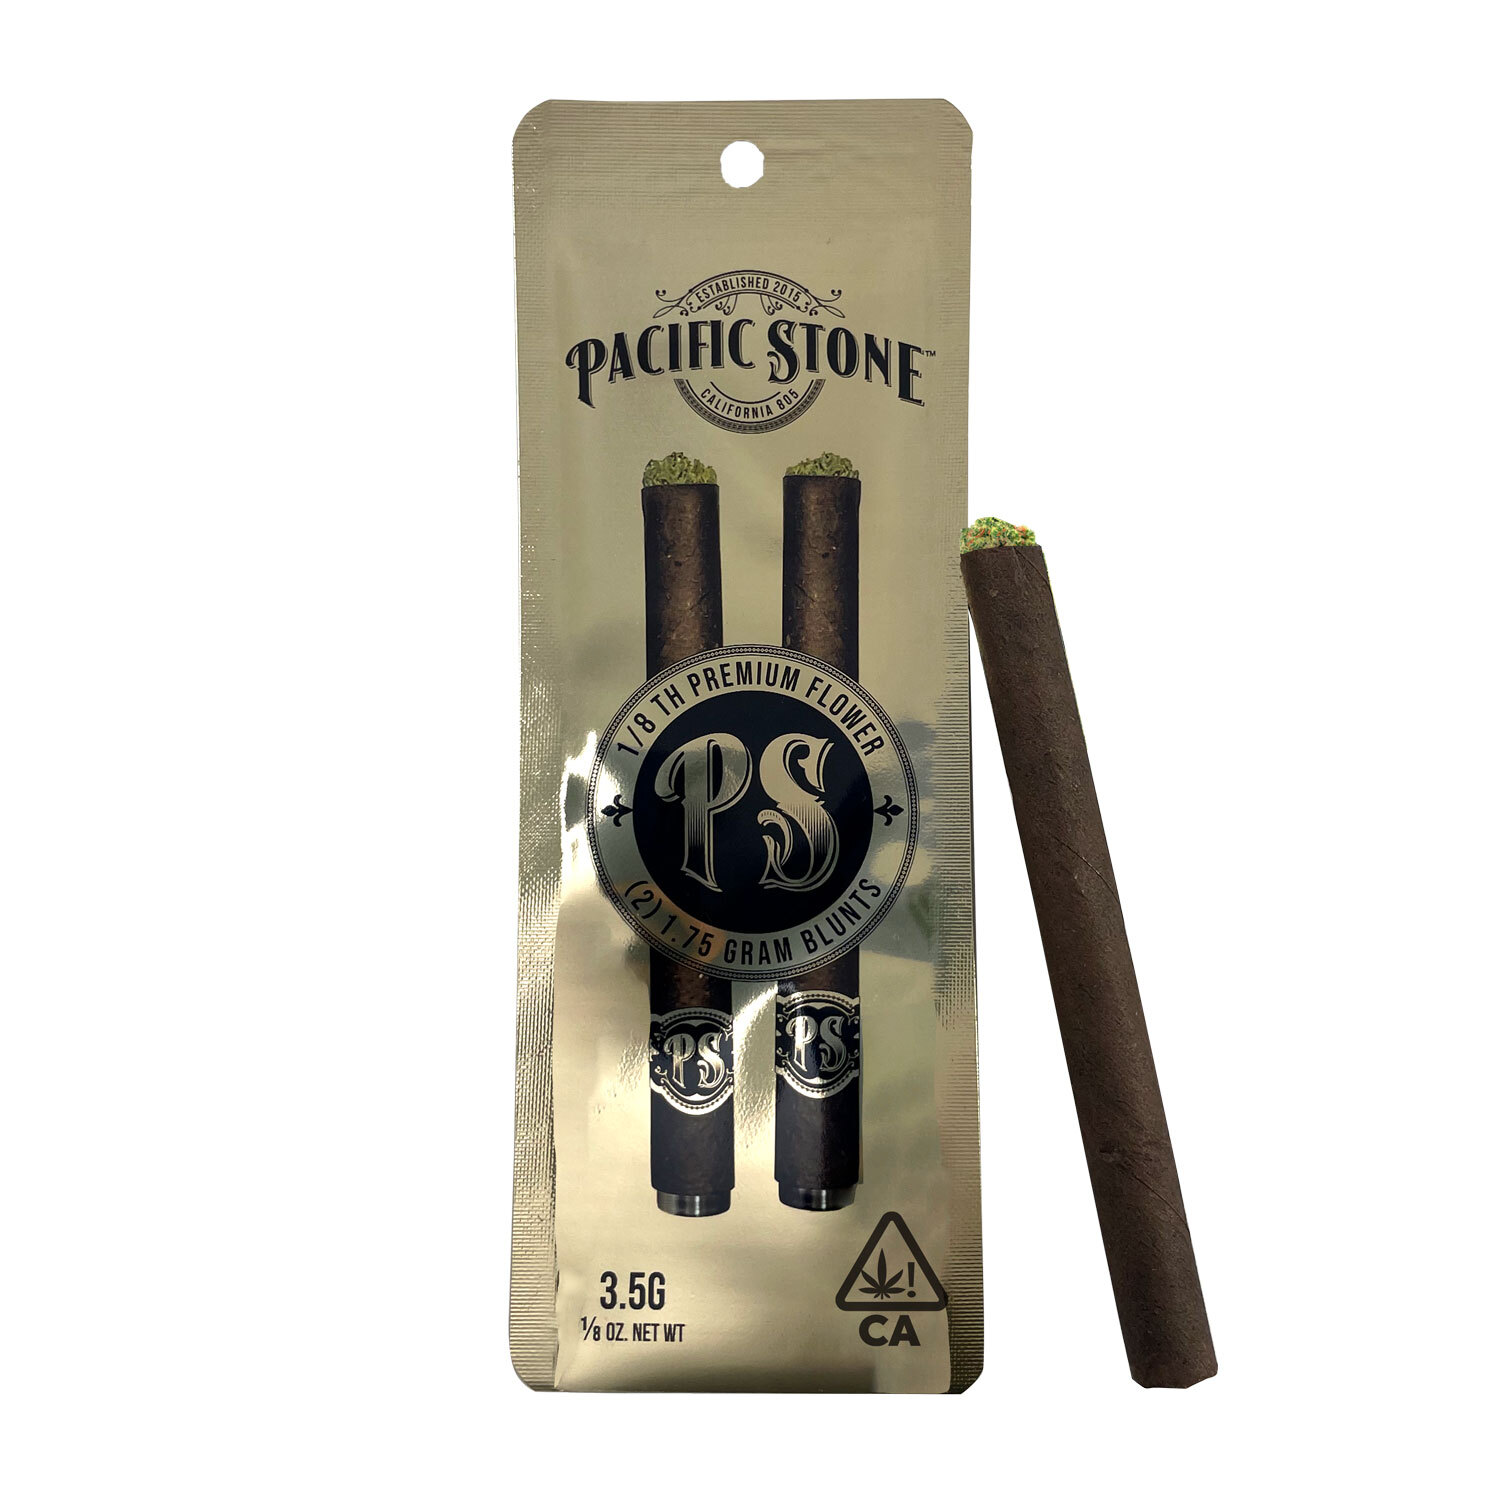 A photograph of Pacific Stone Blunt 1.75g Indica PR OG 2-Pack 3.5g